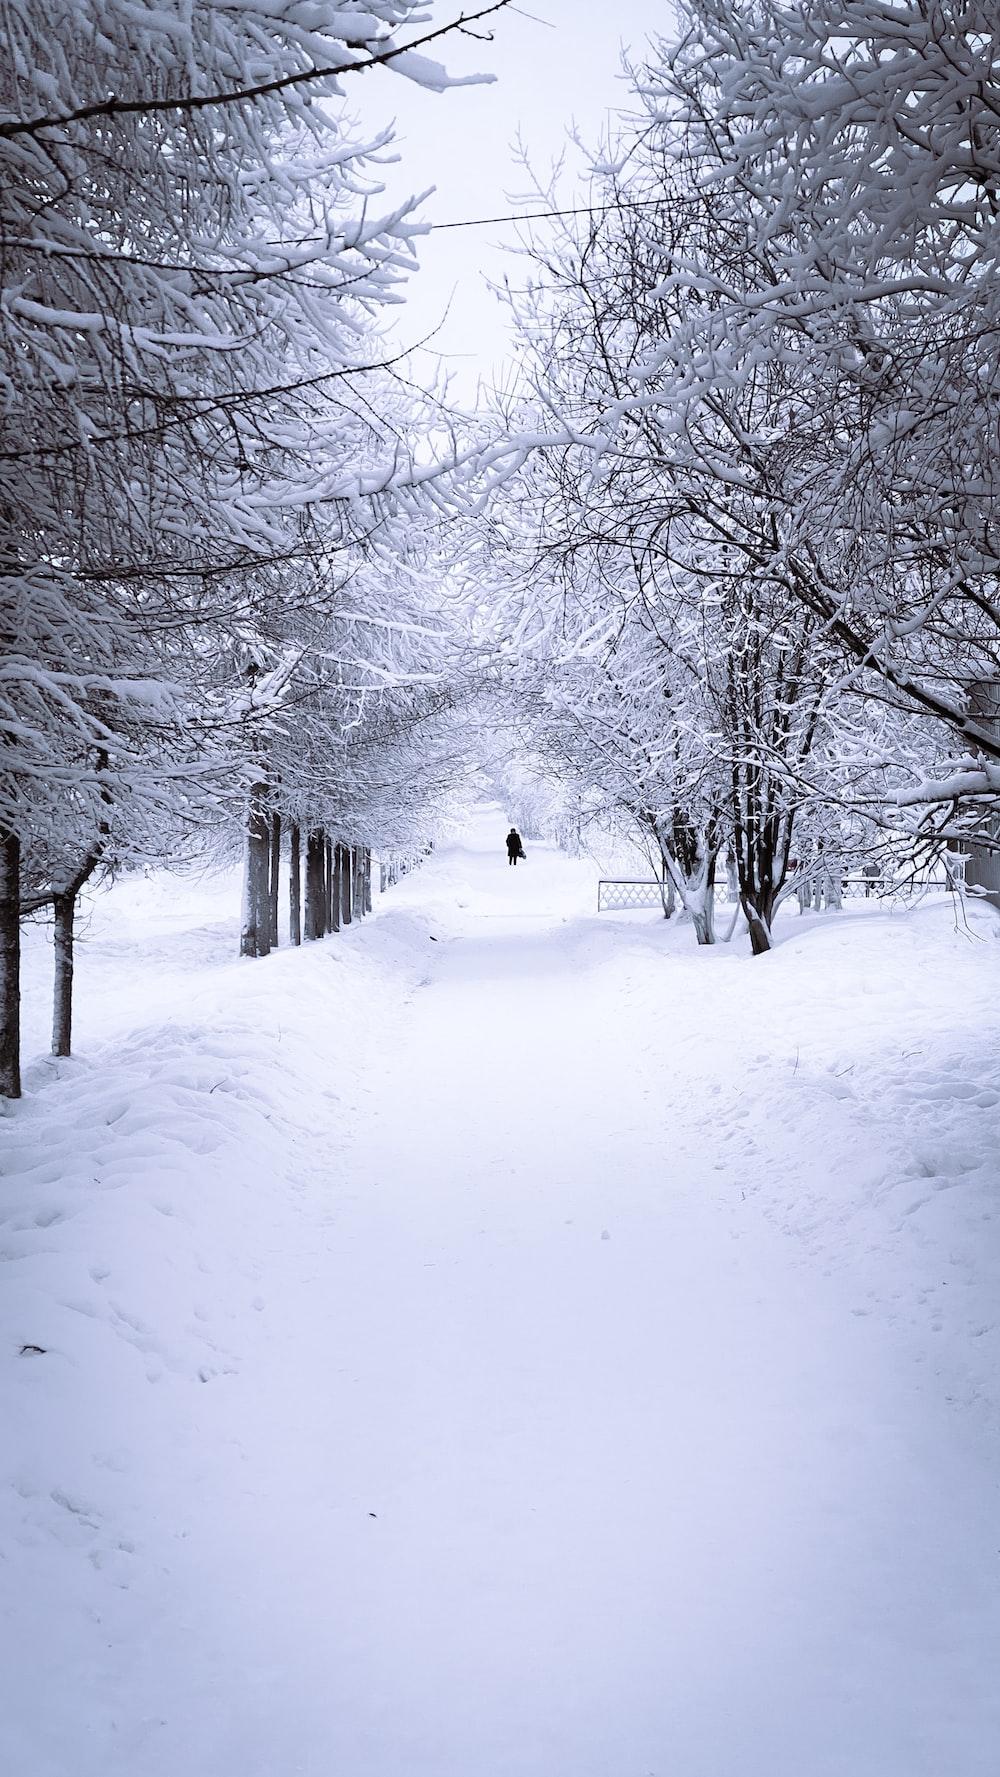 Person Walking On Snow Covered Pathway Between Bare Trees During